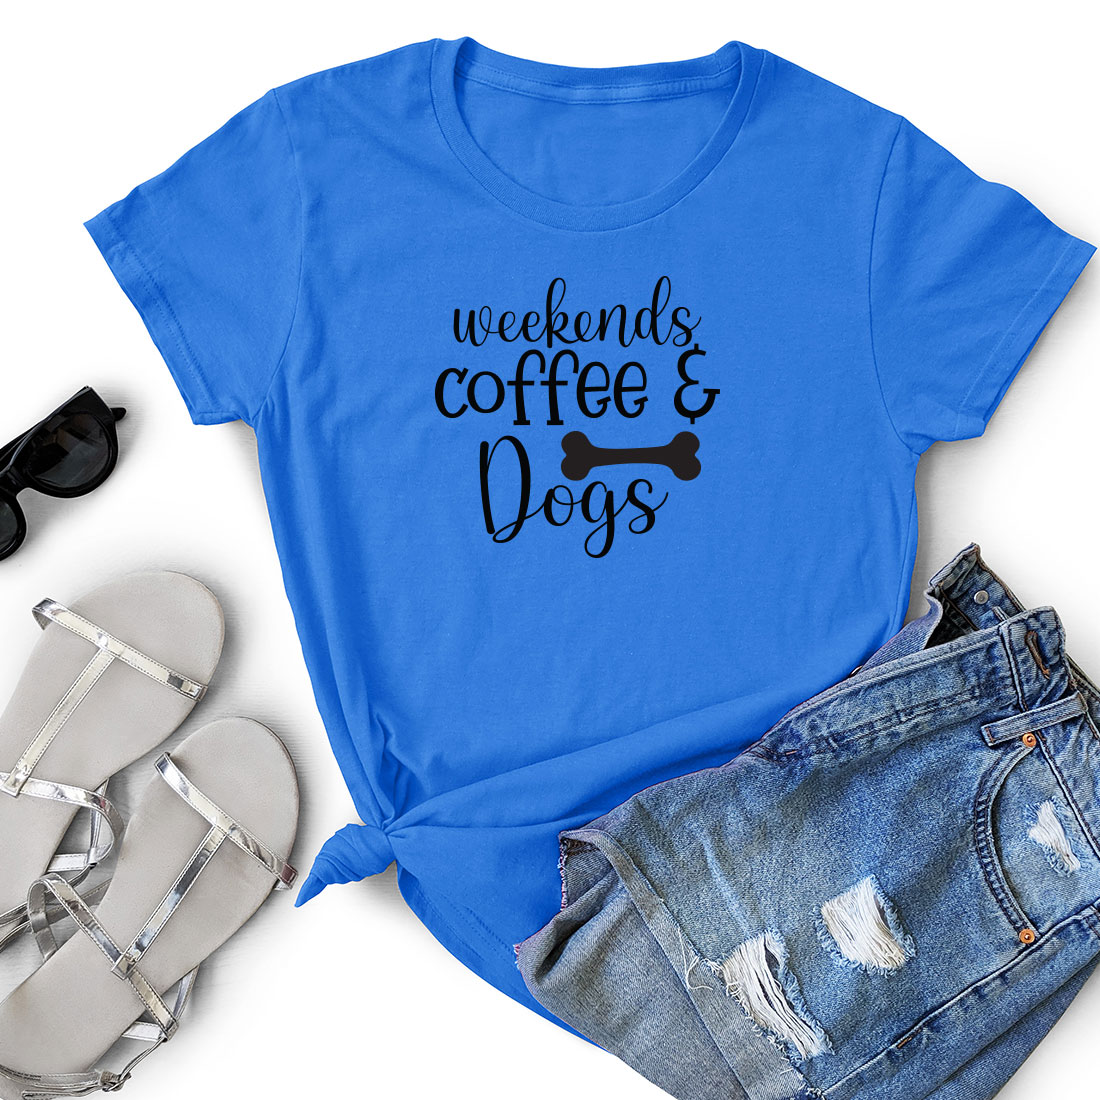 T - shirt that says weekend's coffee and dogs next to a pair.